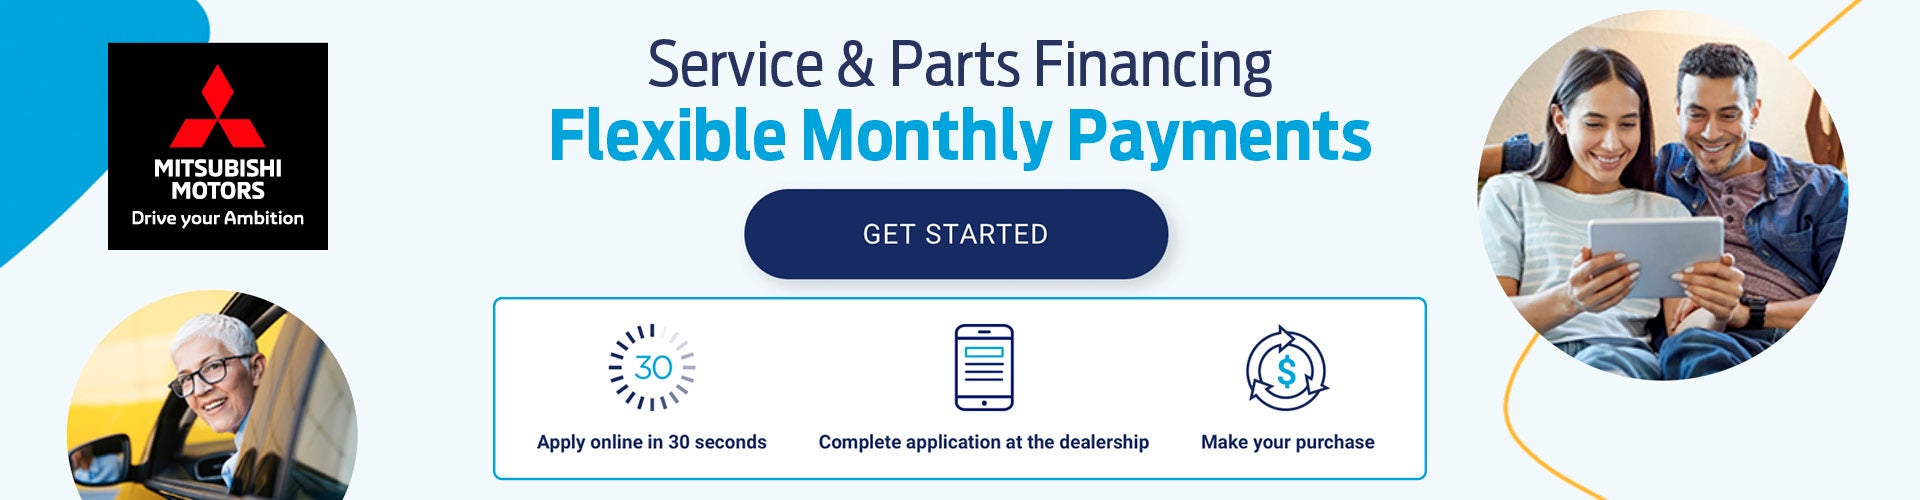 Financing for Parts and Services